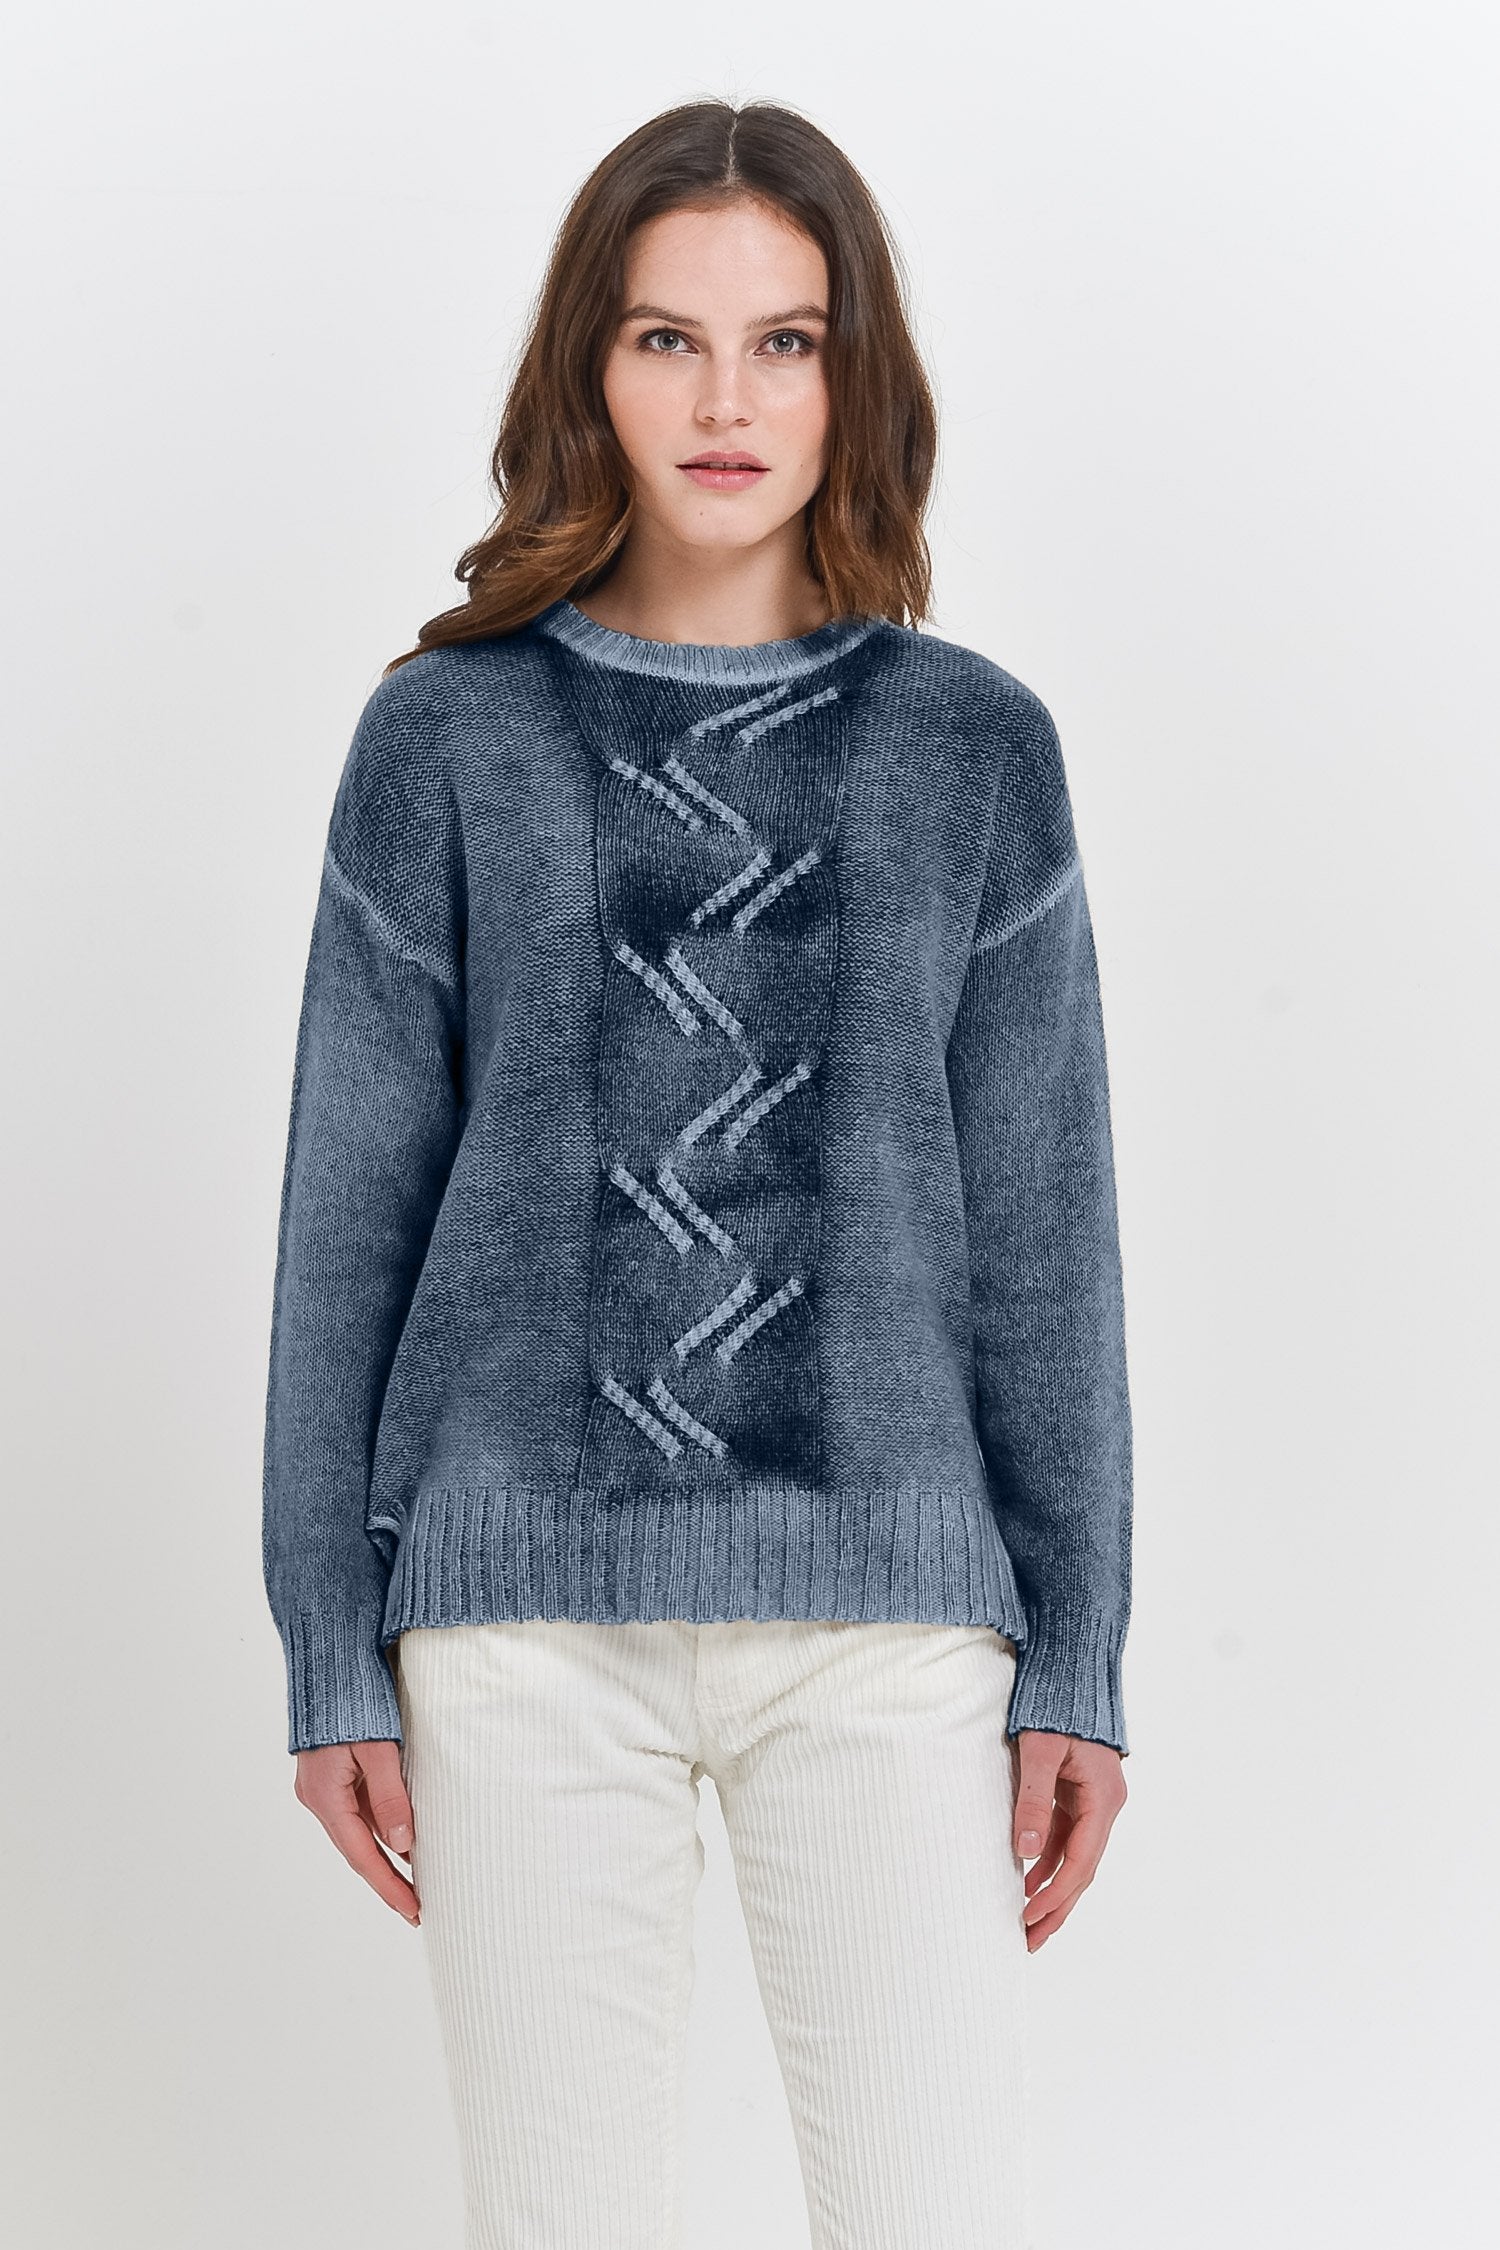 Copse Navy Spray Painted - Comfy Cable Sweater - Sweaters